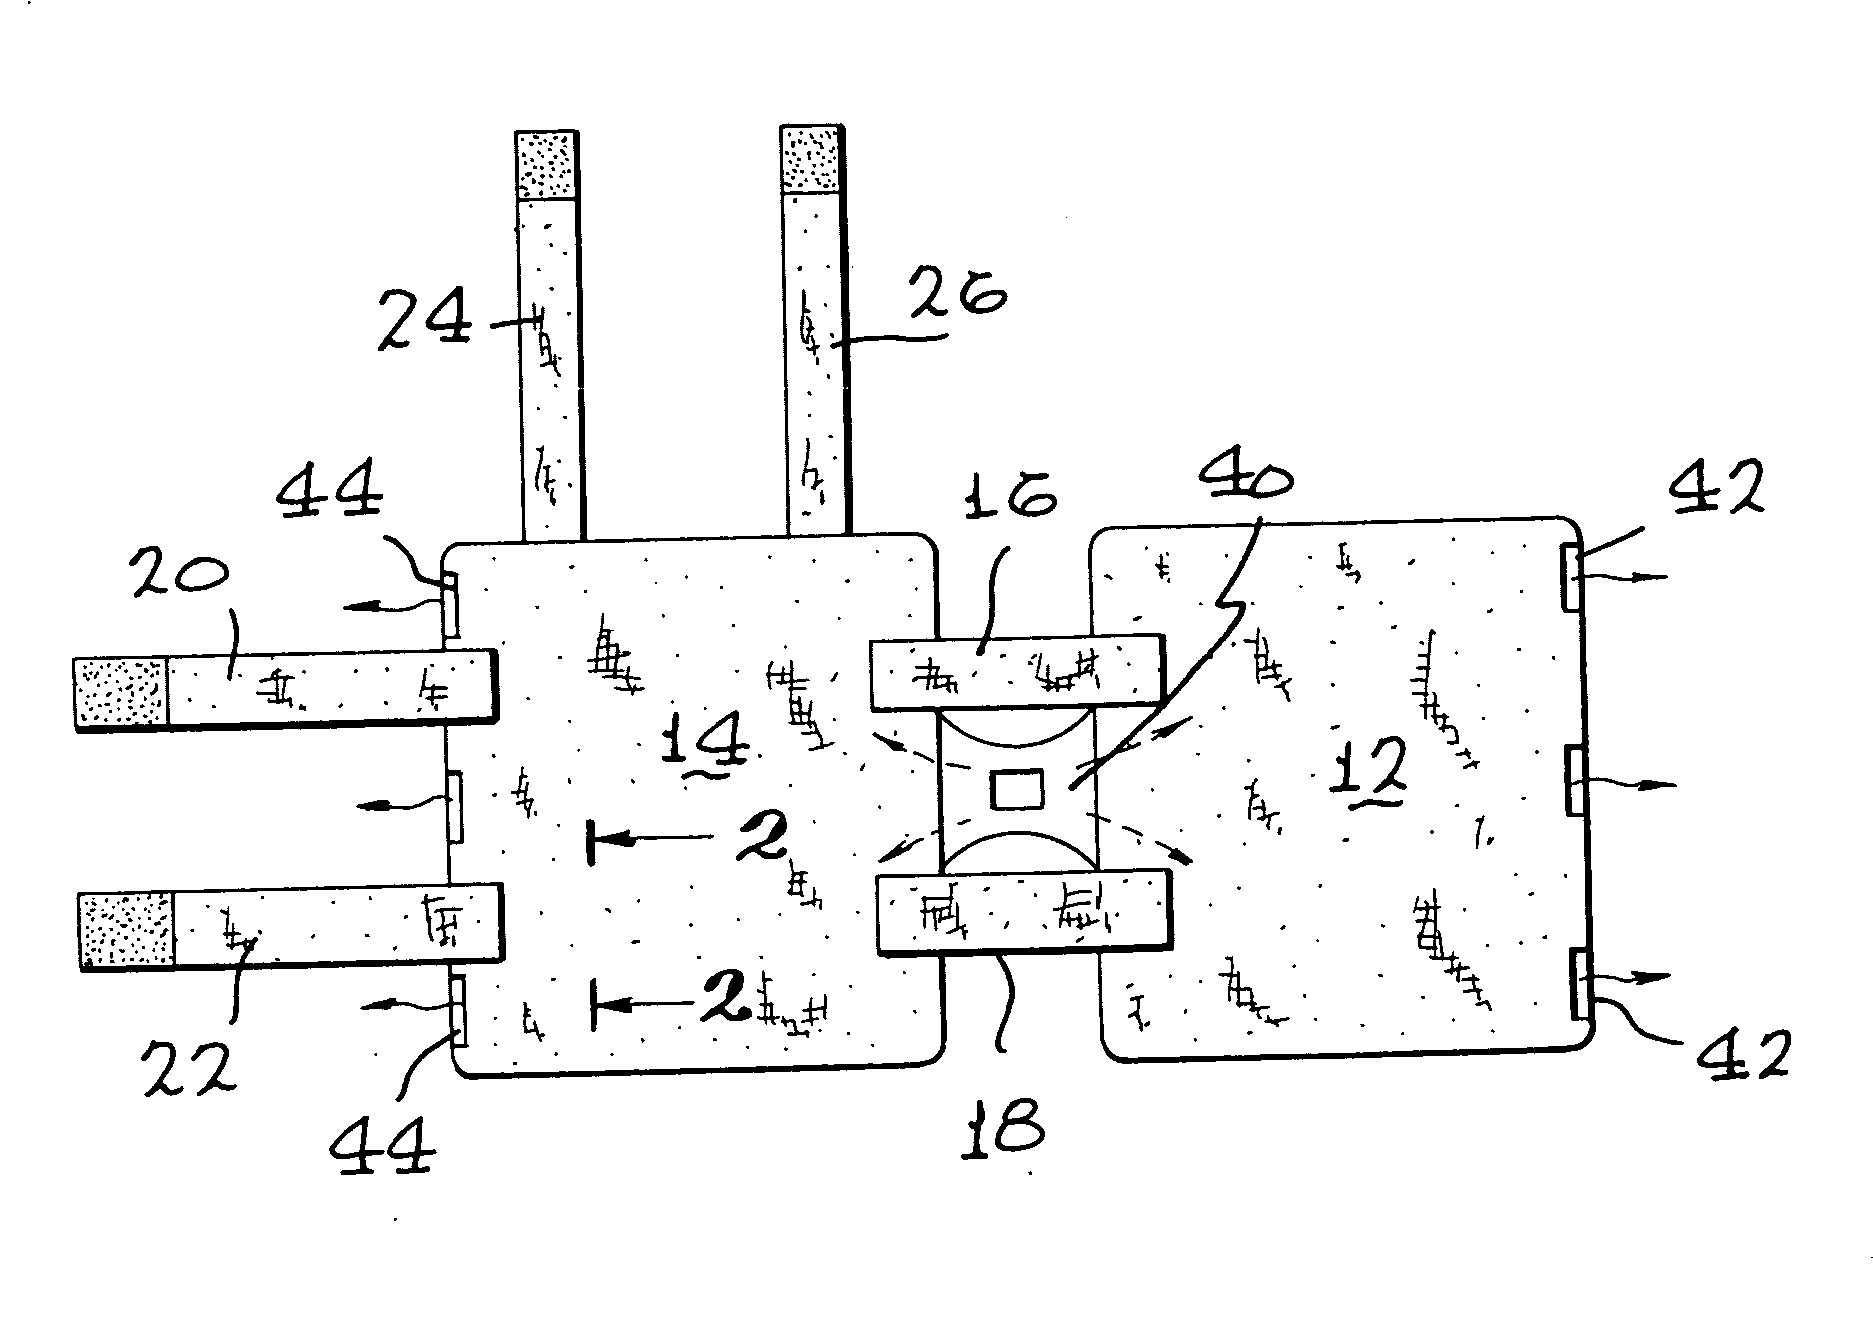 Temperature conditioning apparatus for the trunk of a human body